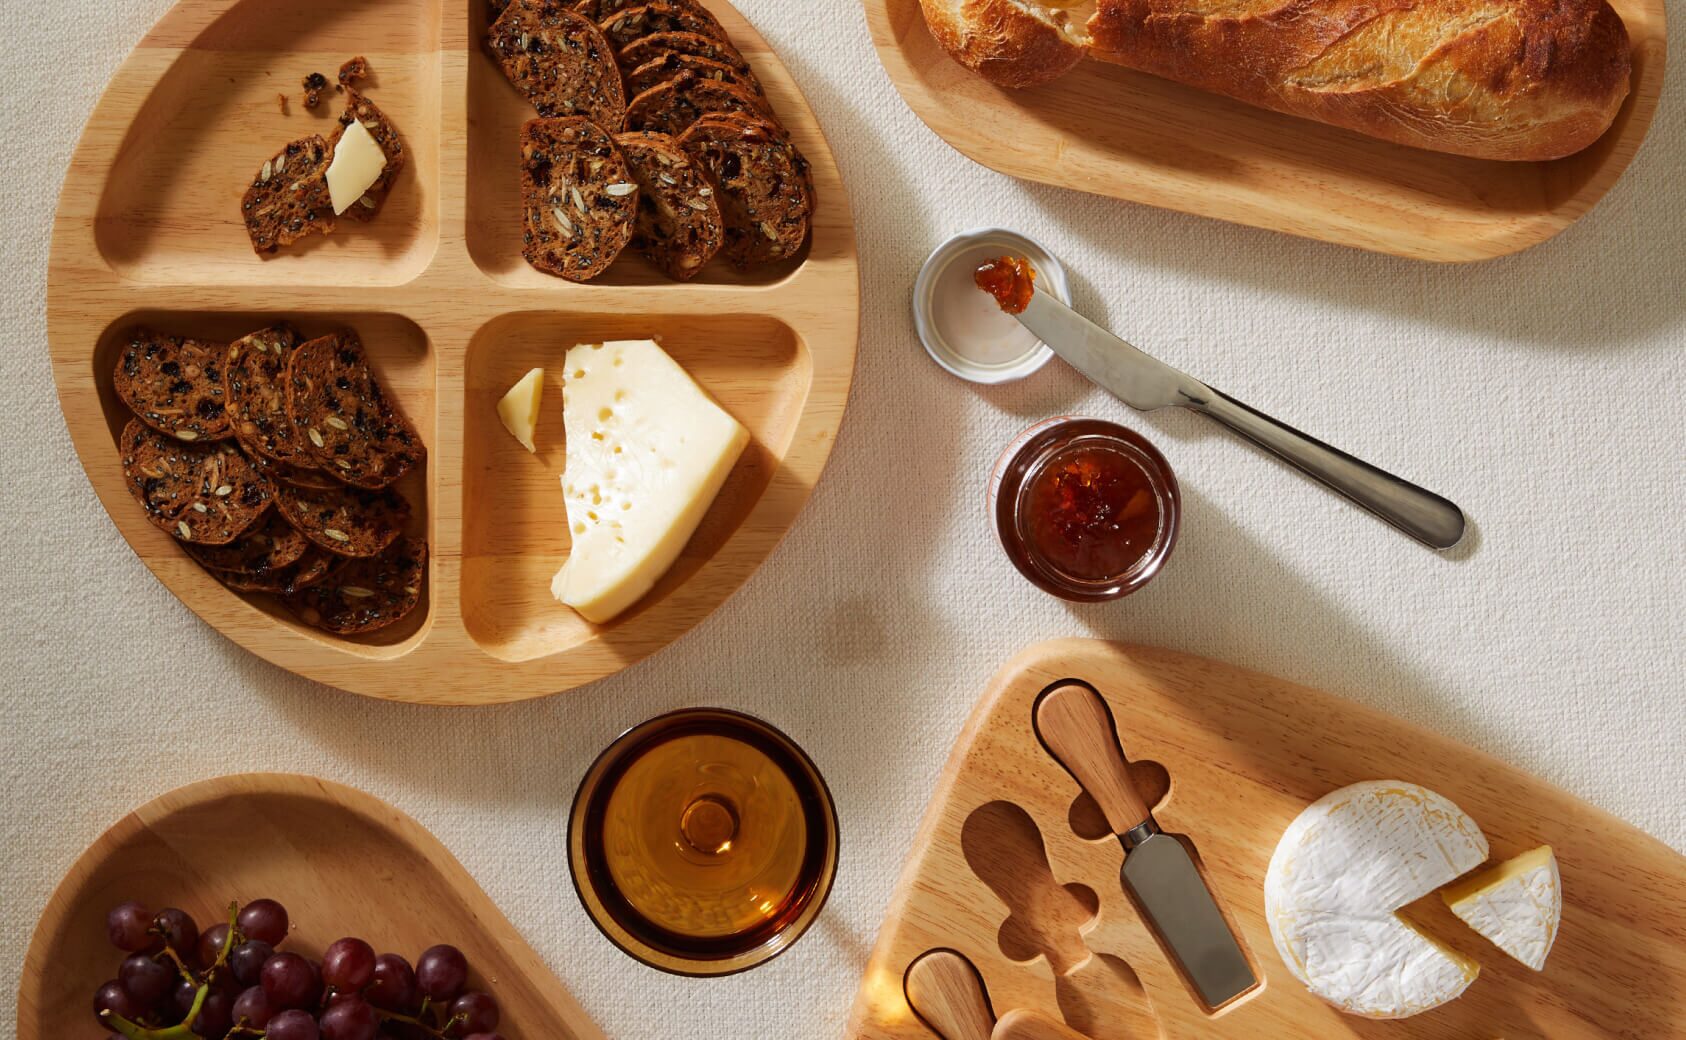 Get a Serving Tray for $25 With Any Purchase. While quantities last.